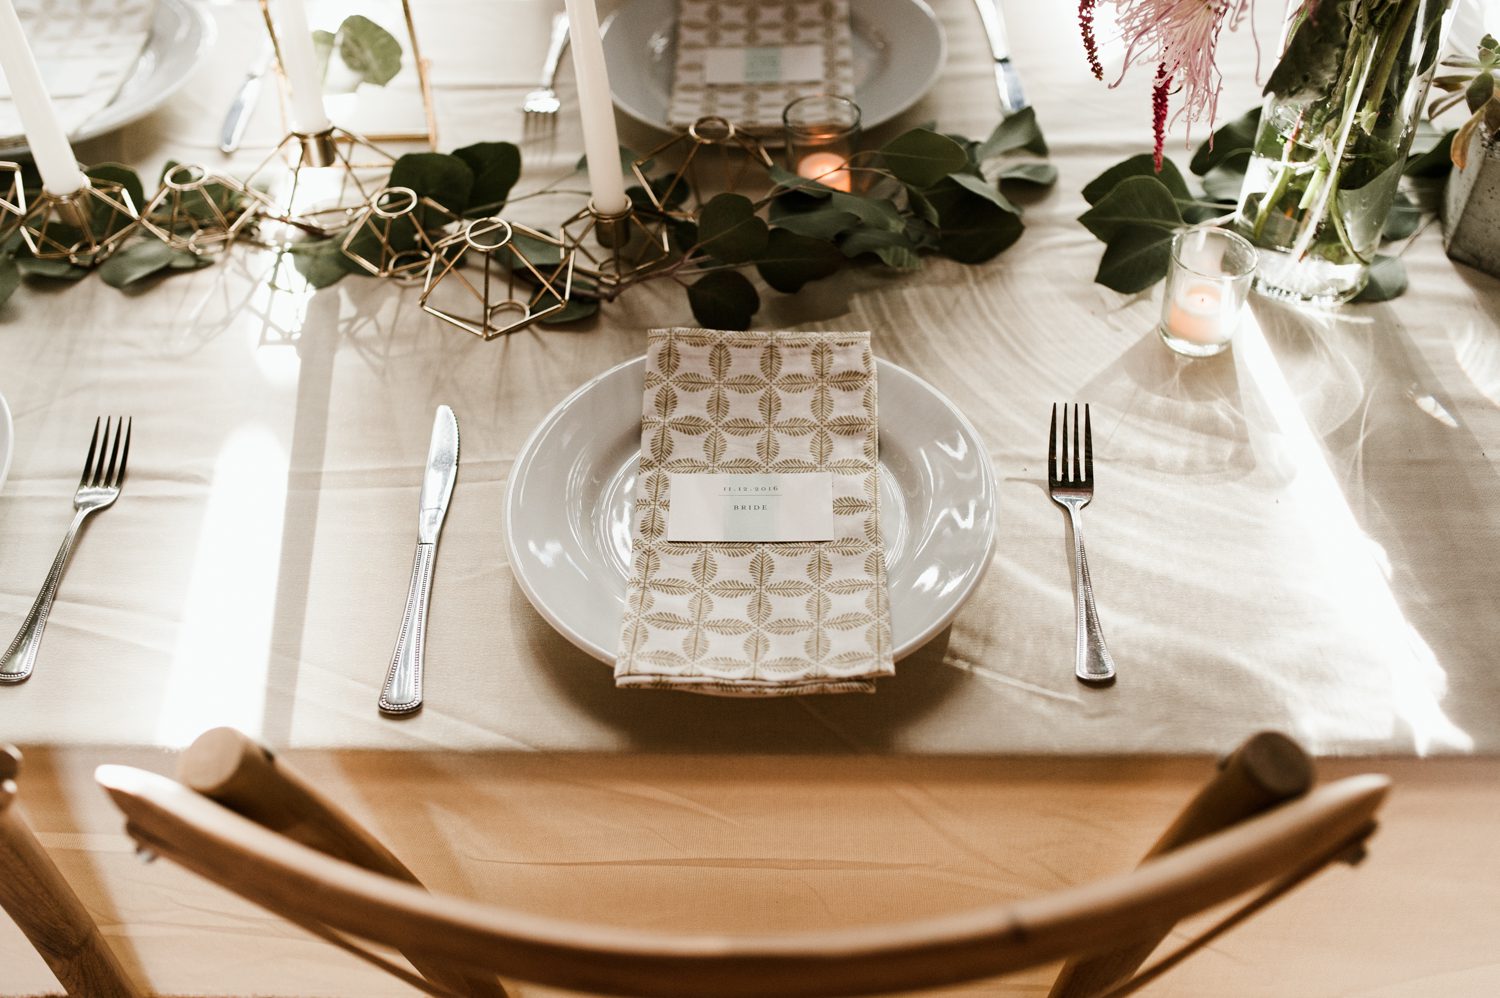 The bride's table setting. By Chico Wedding Photographer Briana Morrison